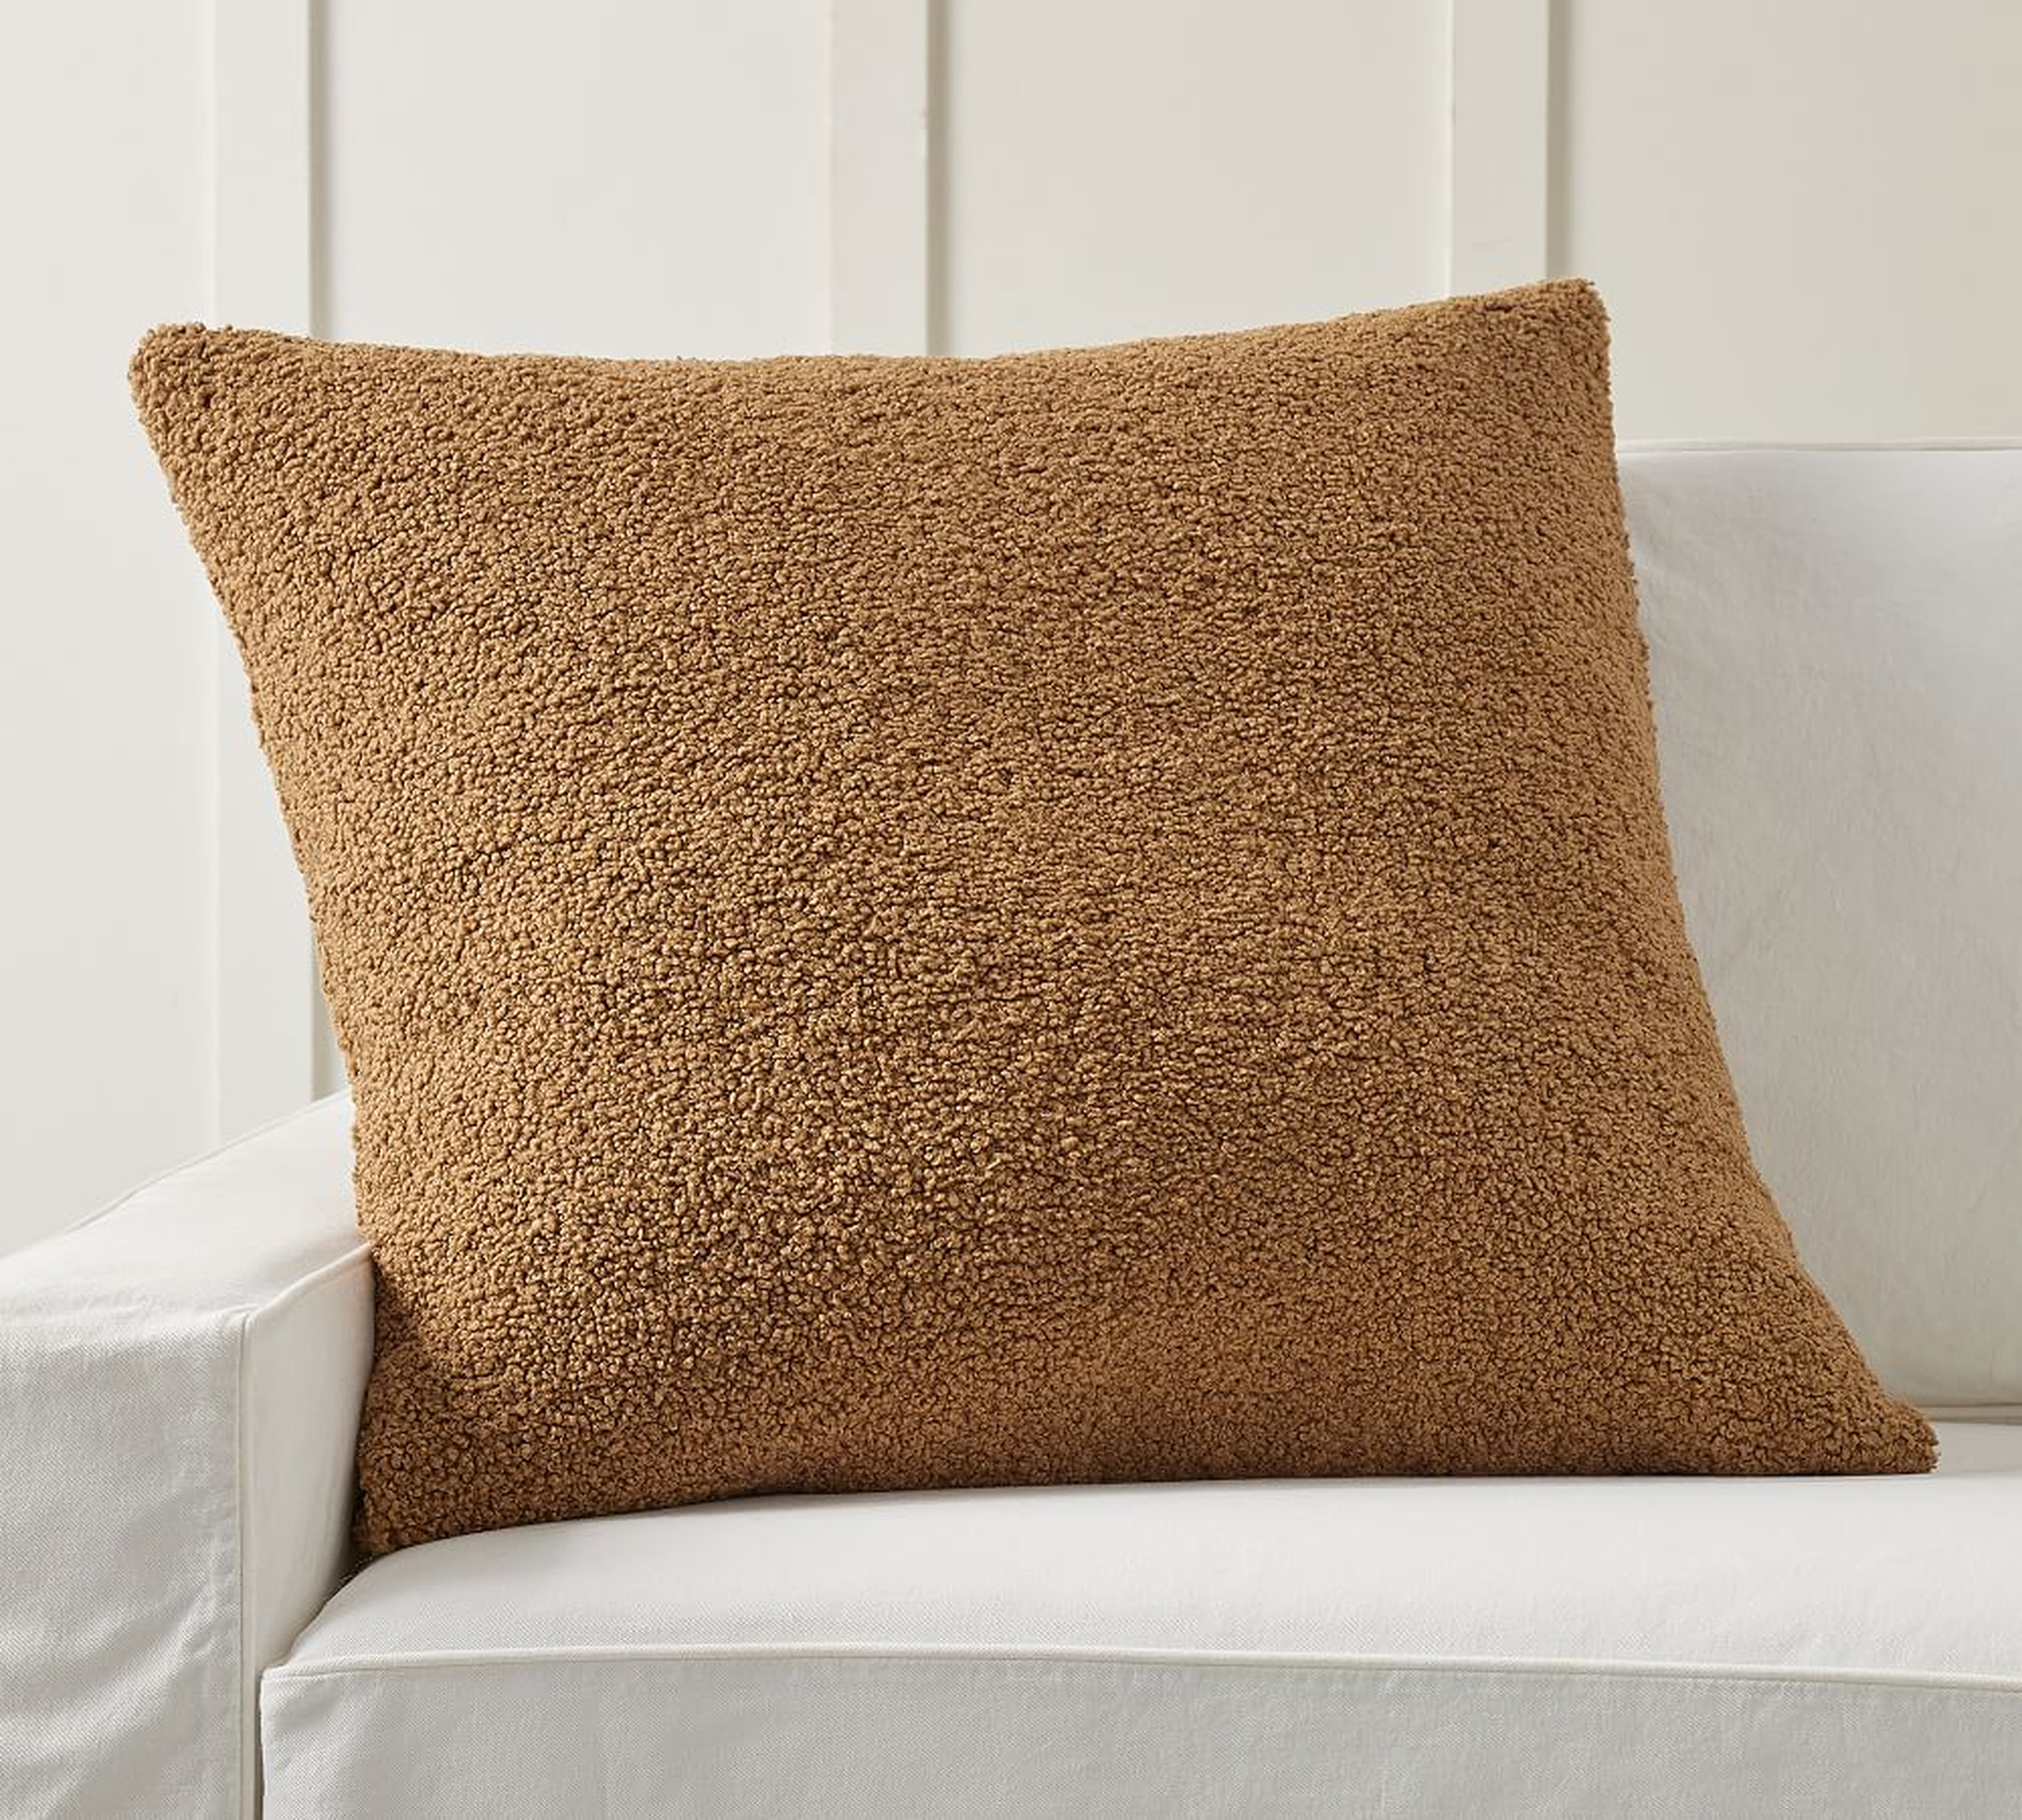 Cozy Teddy Faux Fur Pillow Cover, 30 x 30", Tobacco - Pottery Barn